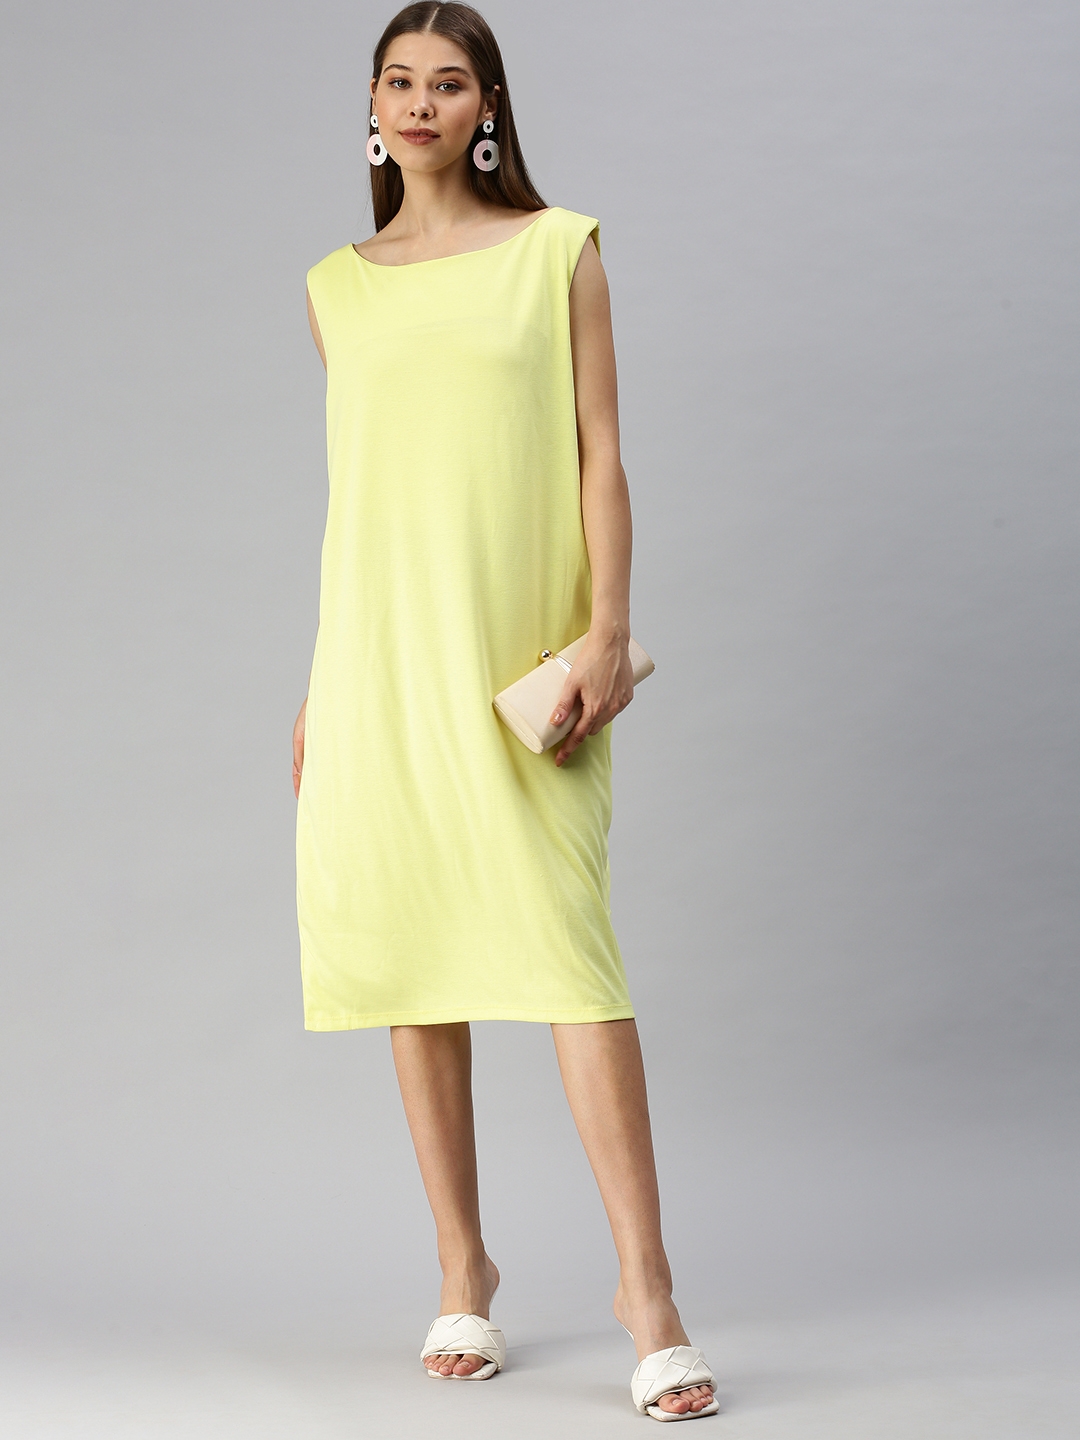 Showoff | SHOWOFF Women Yellow Solid Round Neck Sleeveless Knee length T-shirt Dress 4